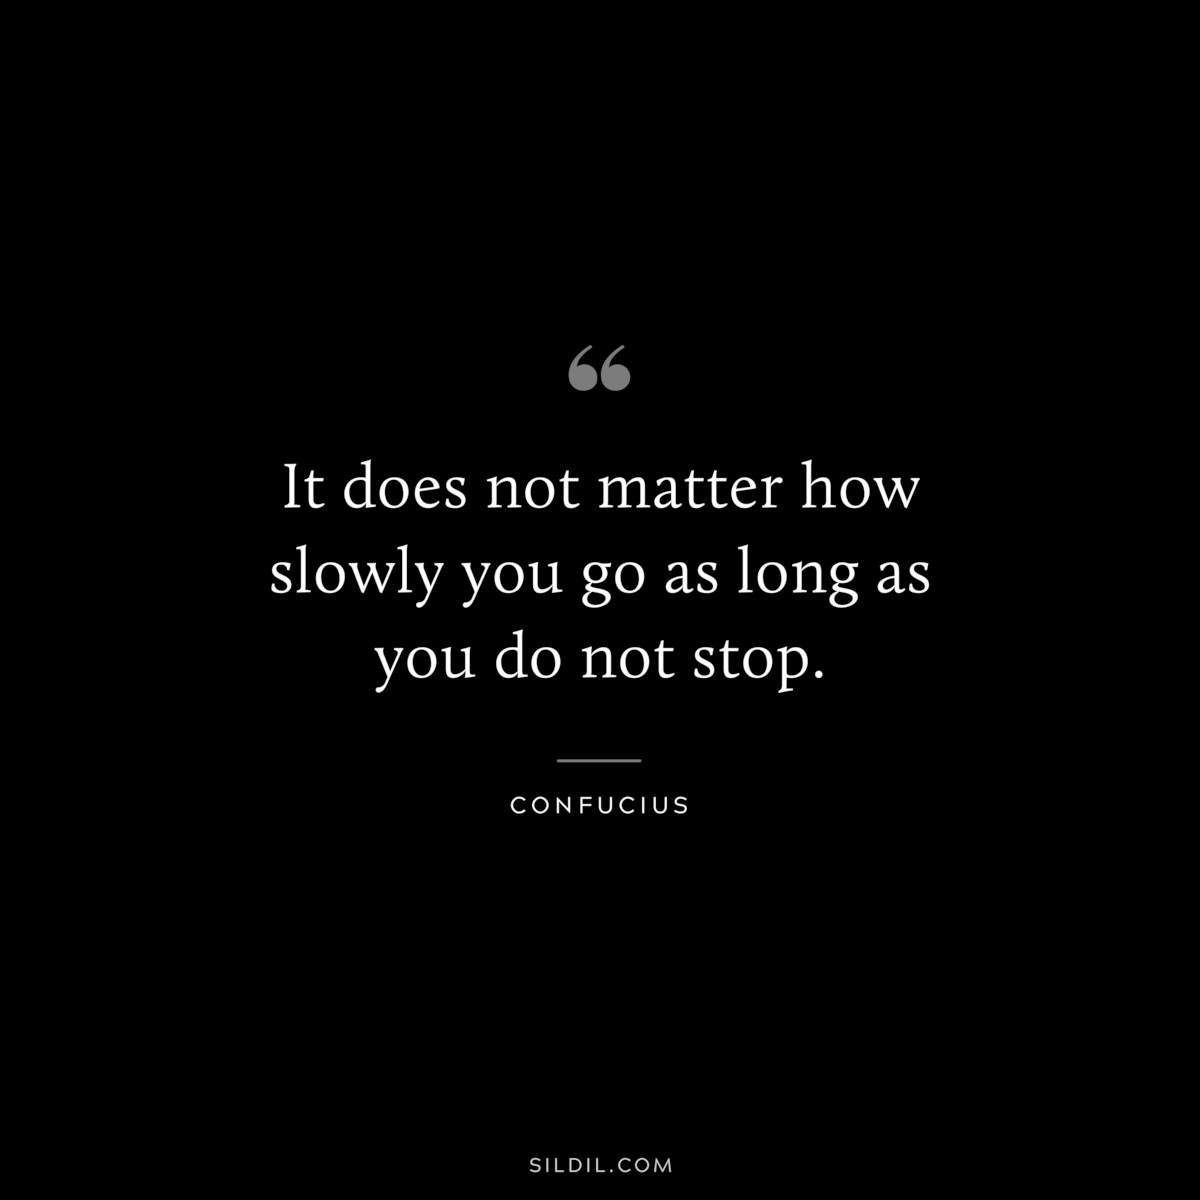 It does not matter how slowly you go as long as you do not stop. ― Confucius